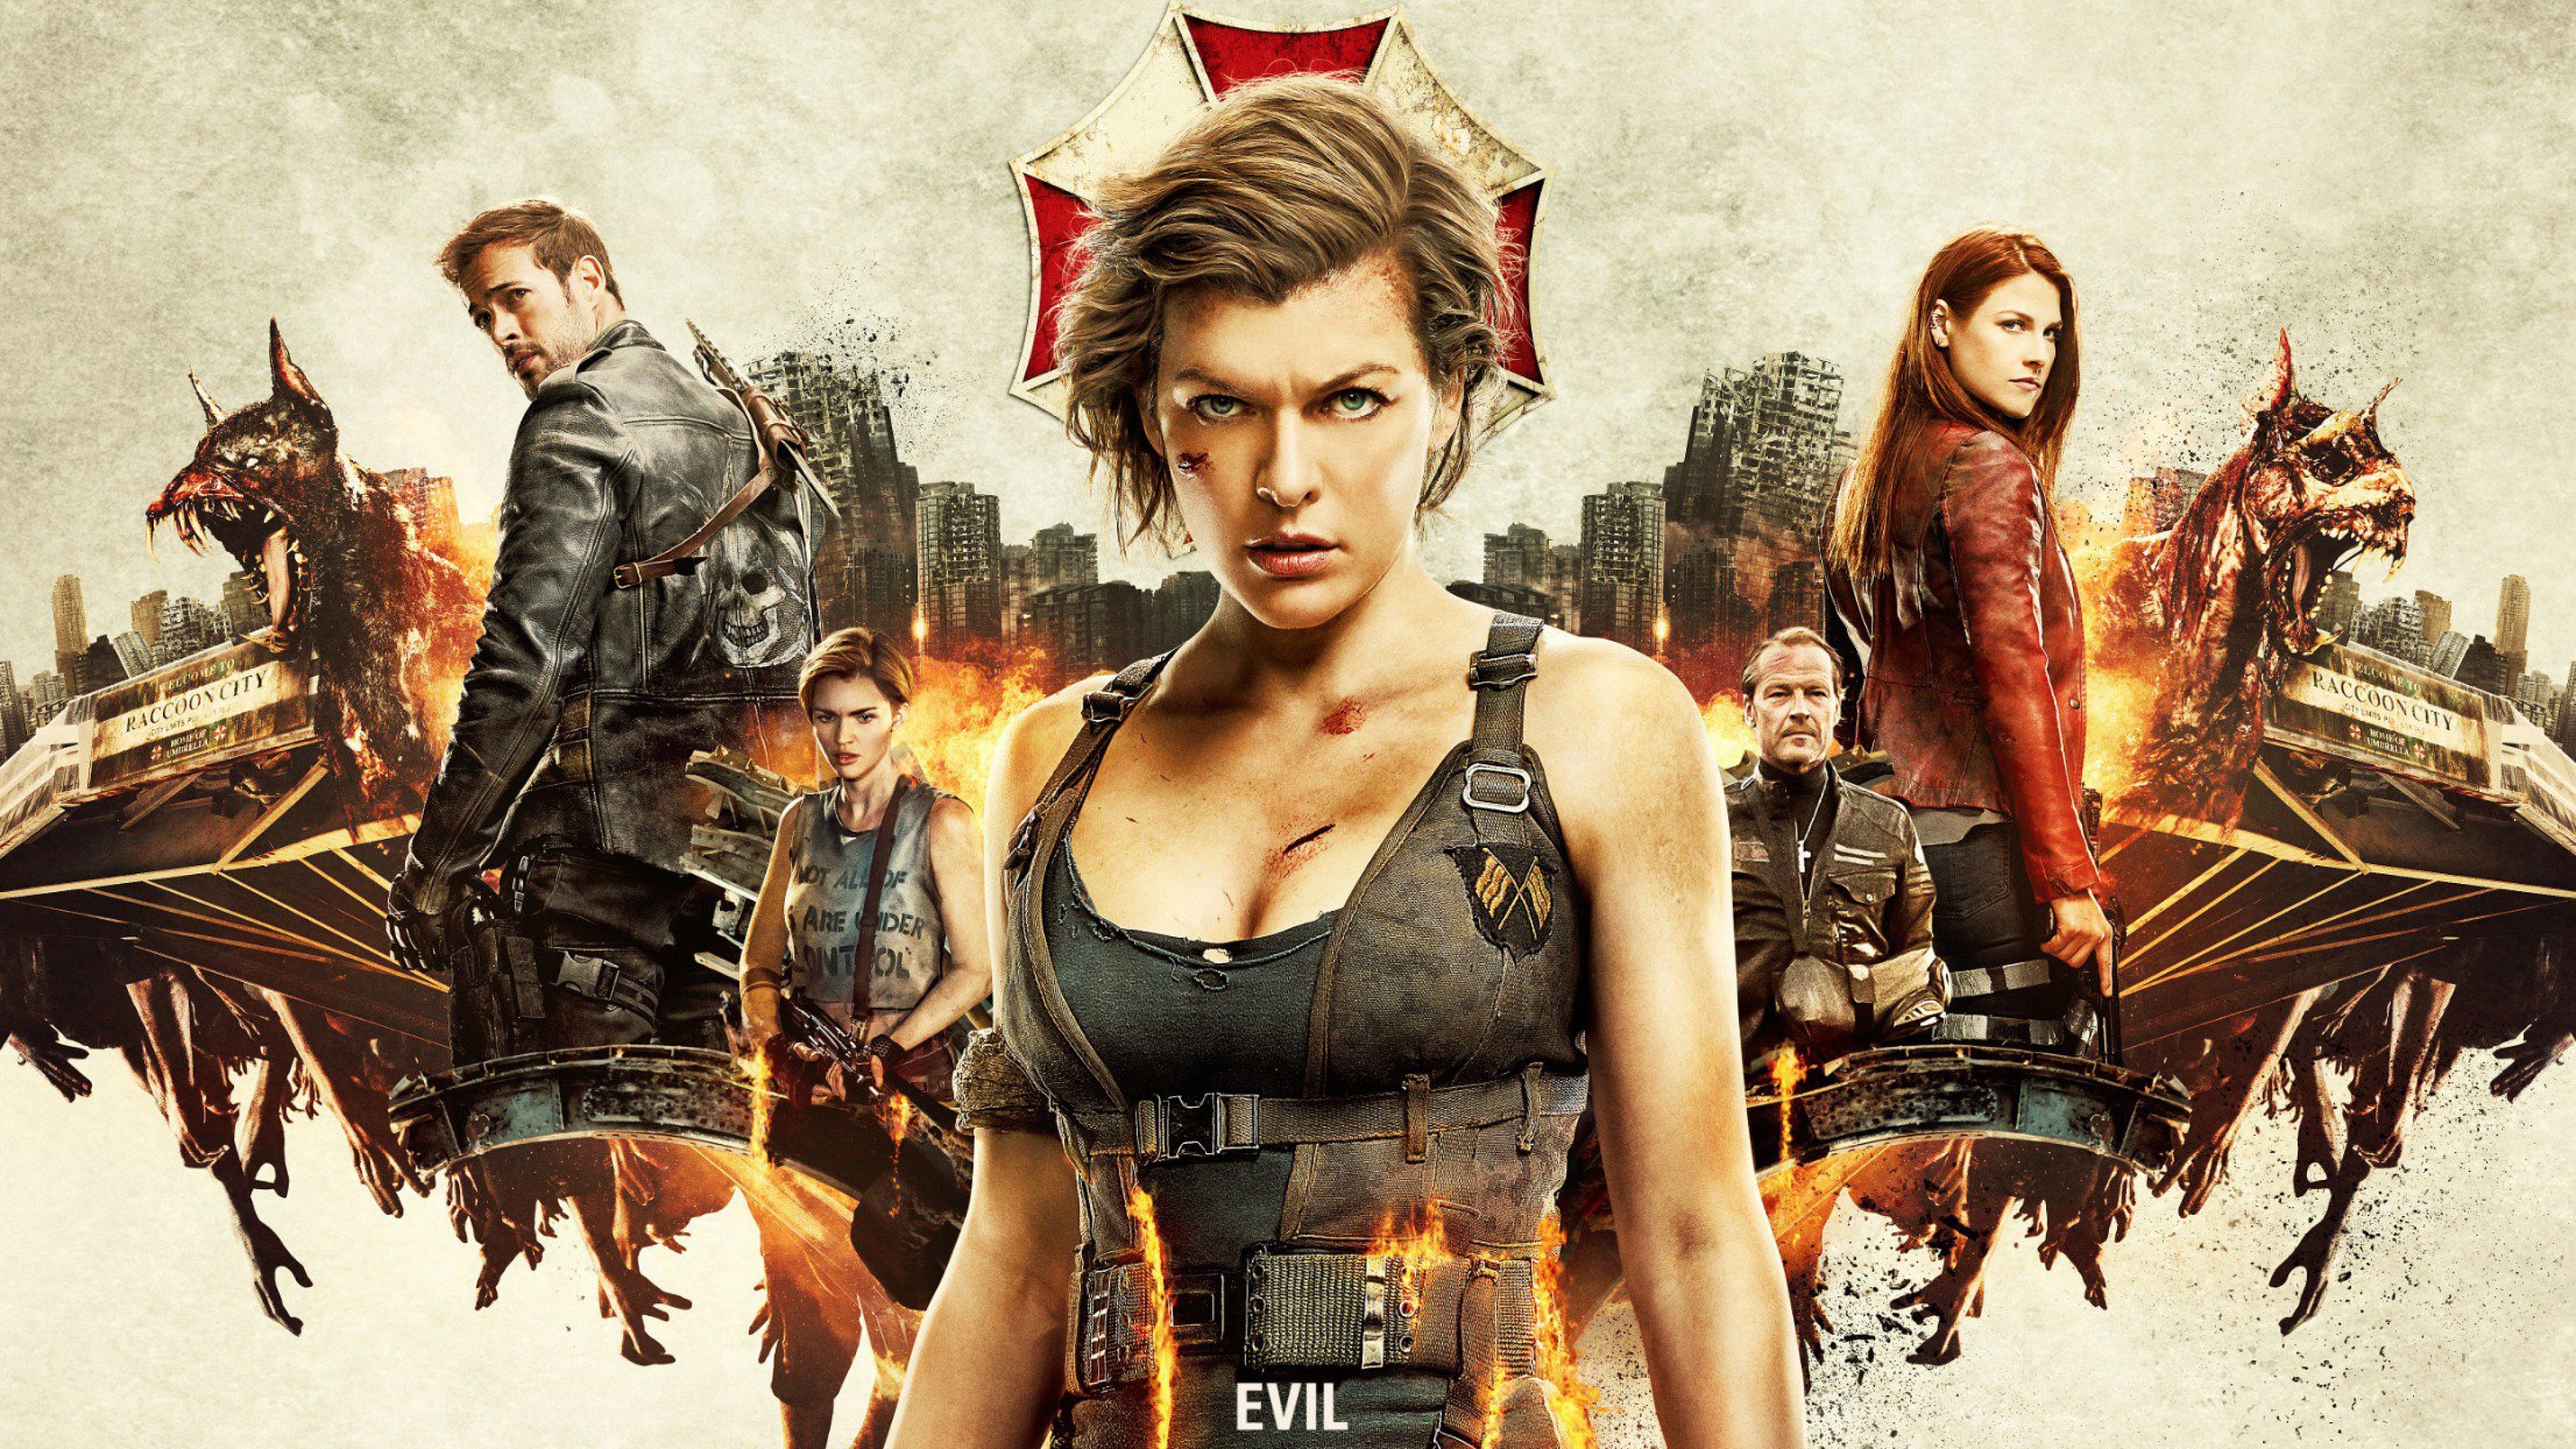 Resident Evil The Final Chapter 4k 2016 Movie, HD Movies, 4k